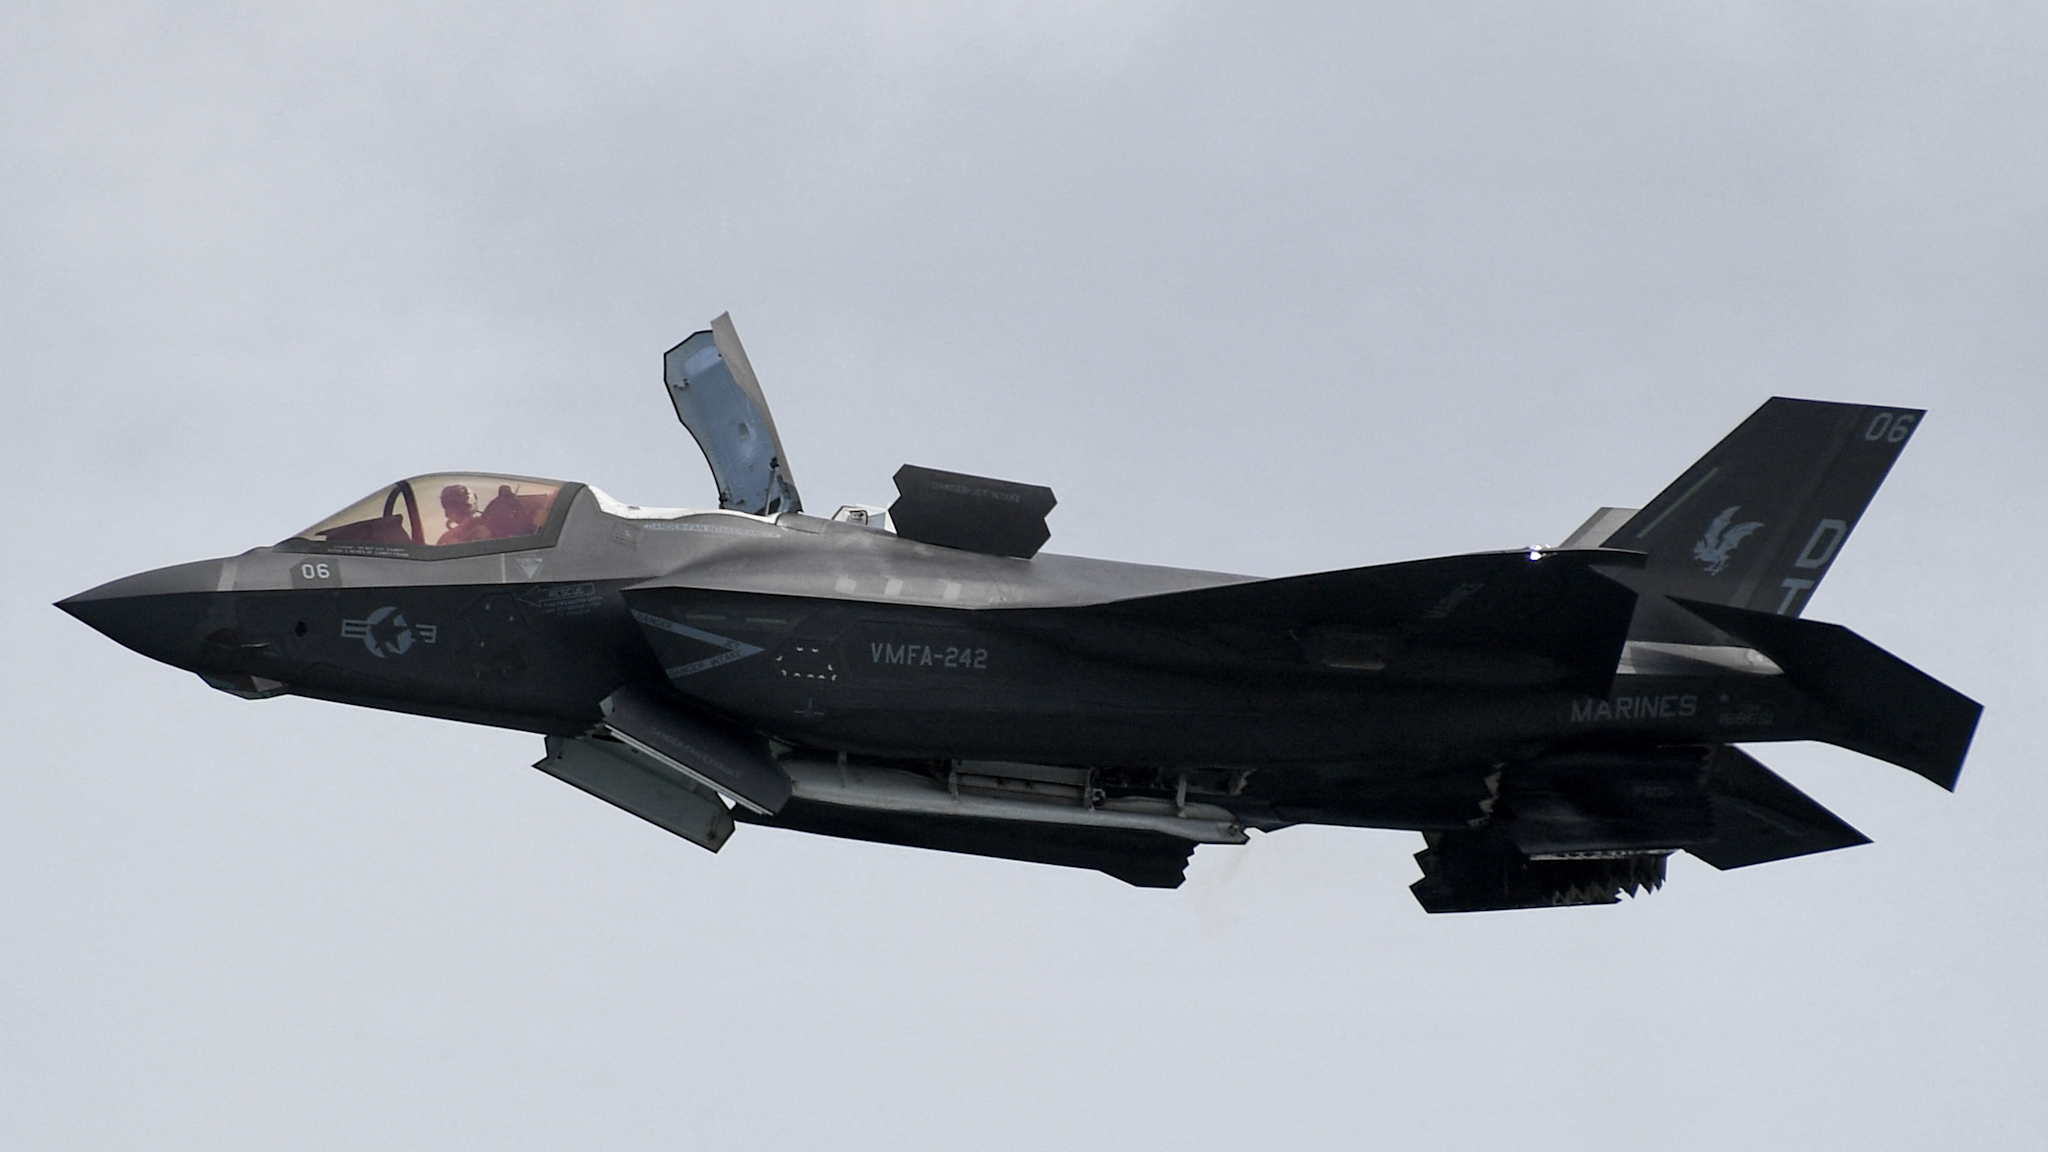 A US Marine Corps F-35B Lightning II, a short takeoff and vertical landing (STOVL) version of the Joint Strike Fighter aircraft, flies past during a preview of the Singapore Airshow in Singapore on February 13, 2022.